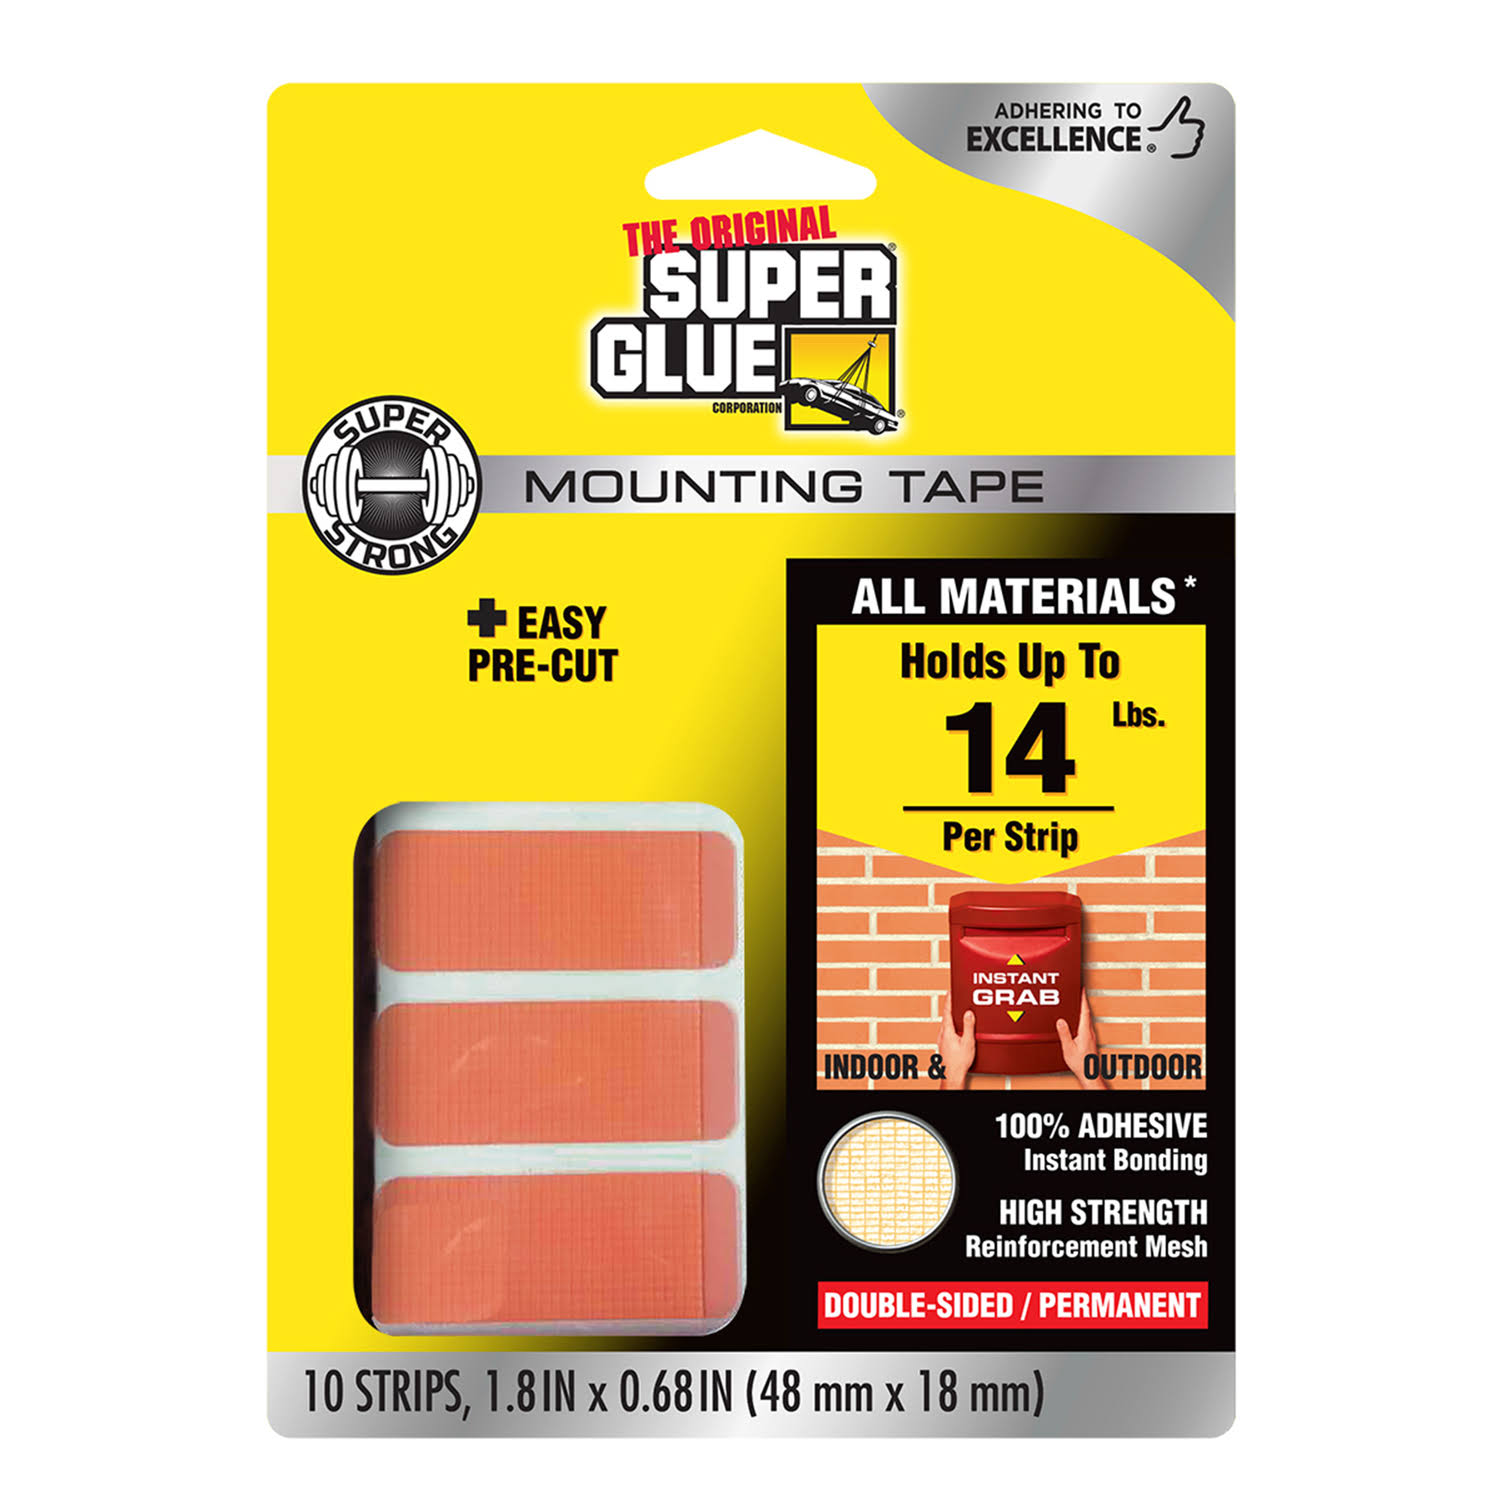 Super Glue Mounting Tape Strips